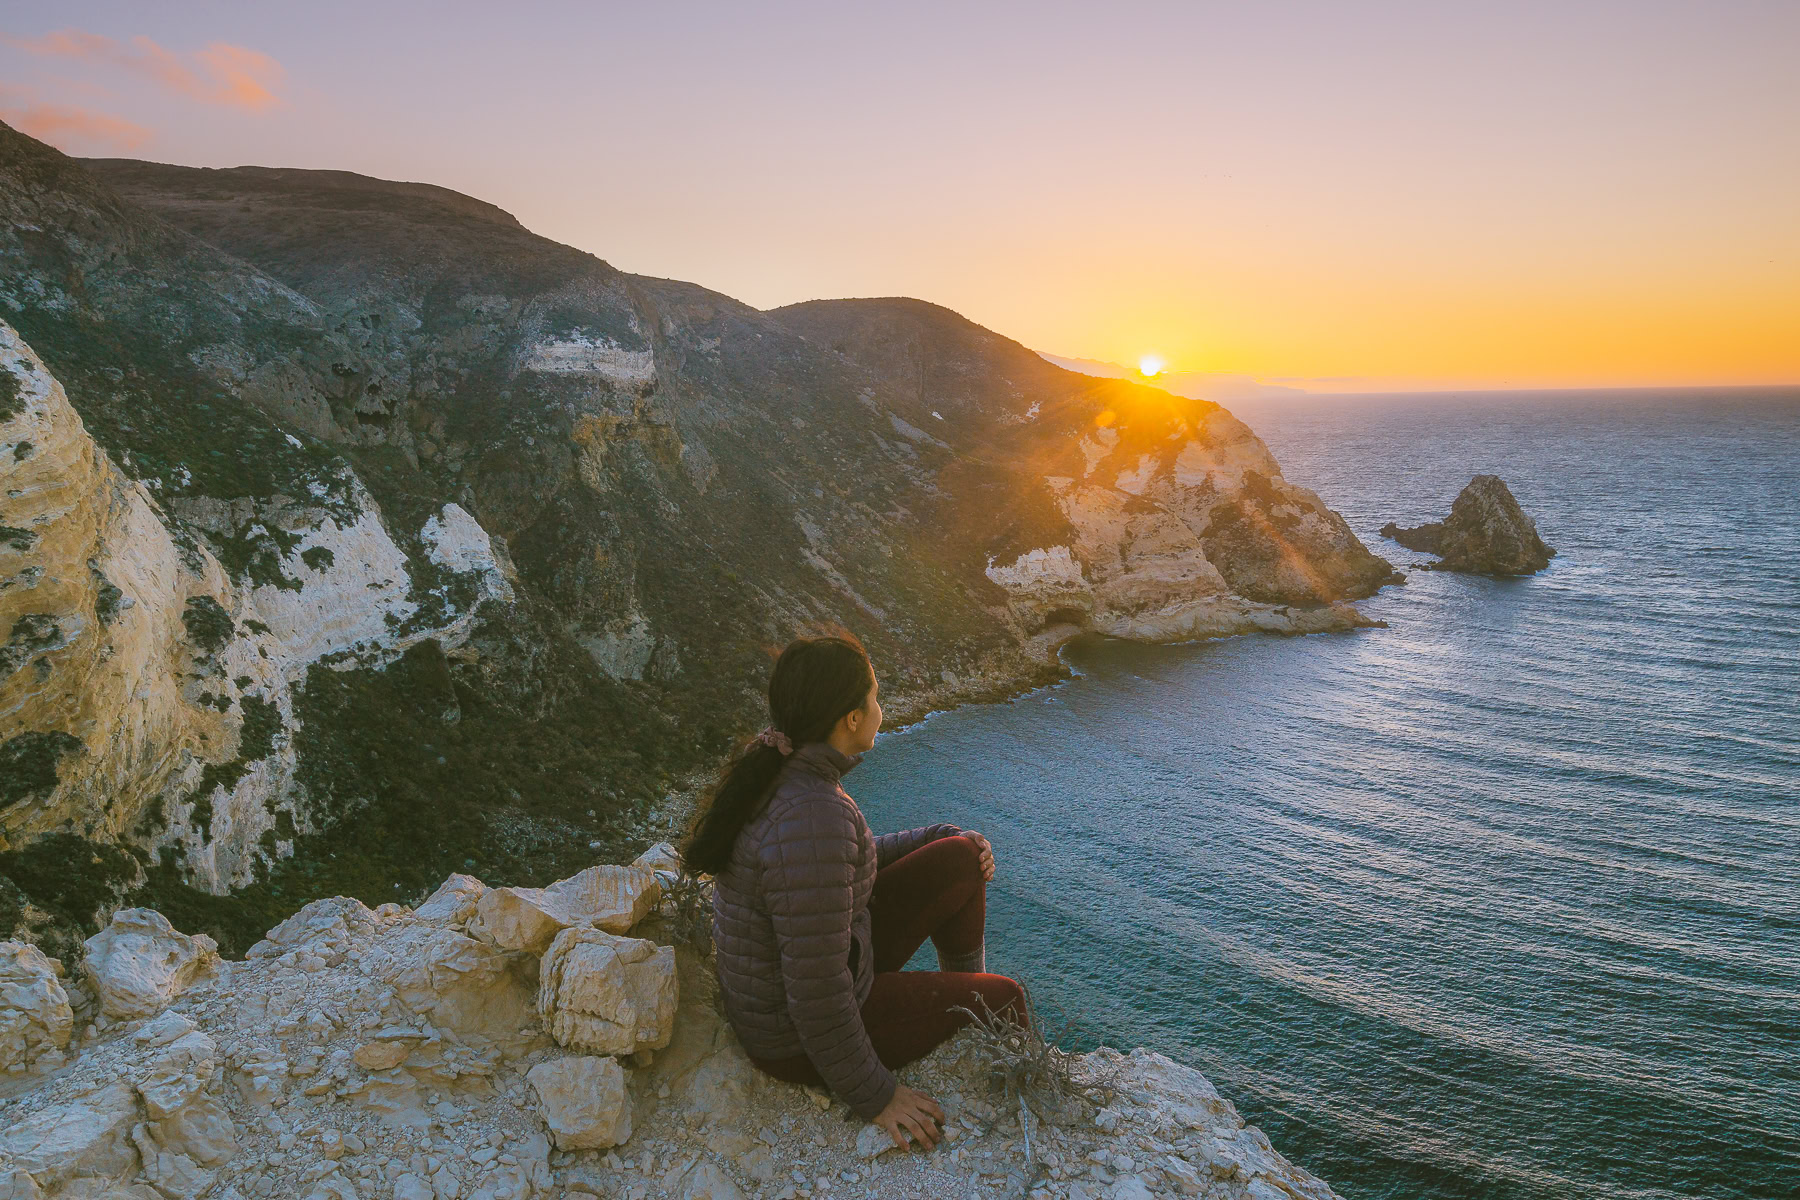 Things to Do in Channel Islands